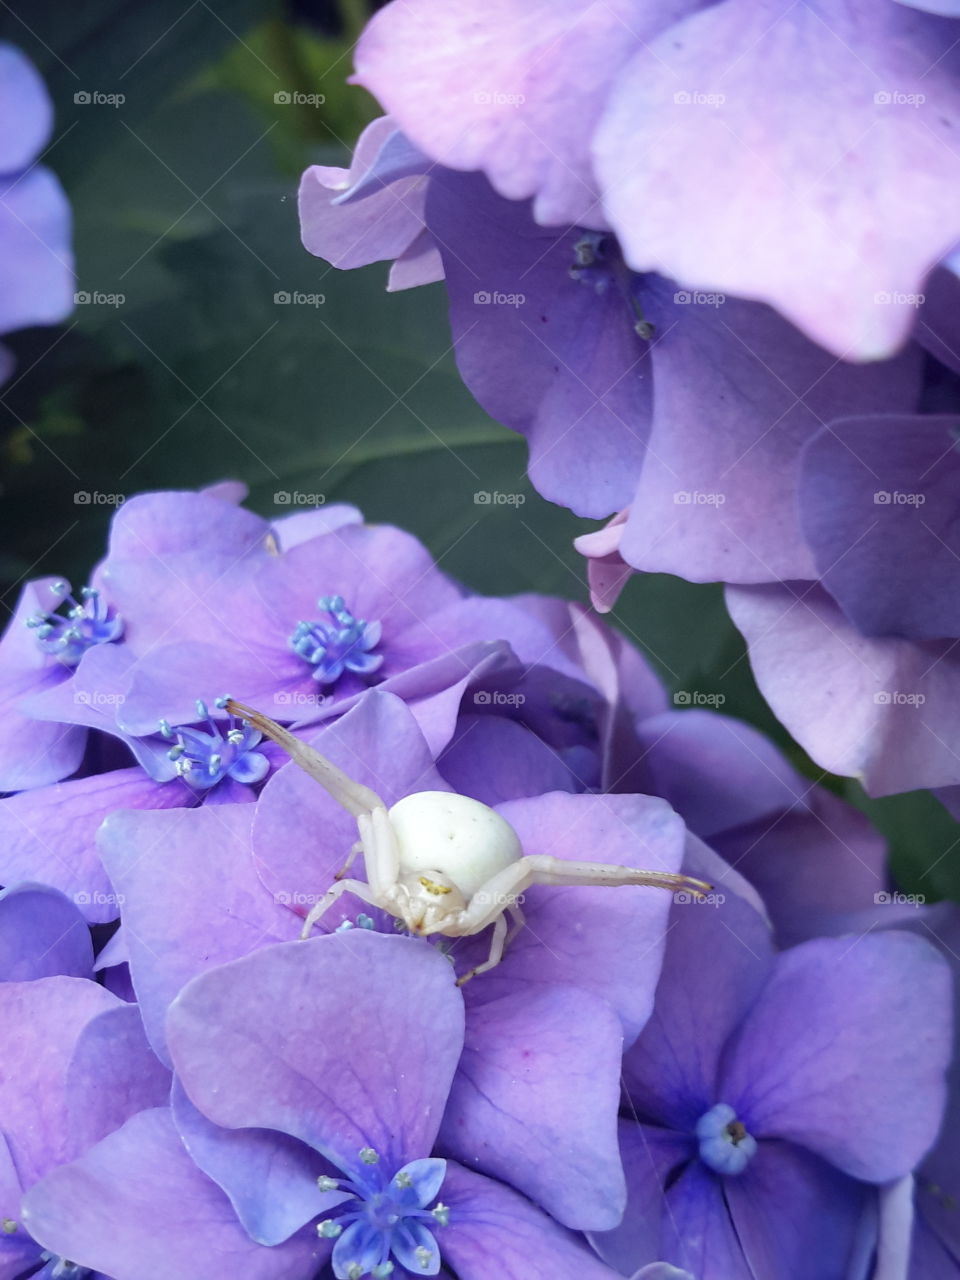 White spider on the flowers.